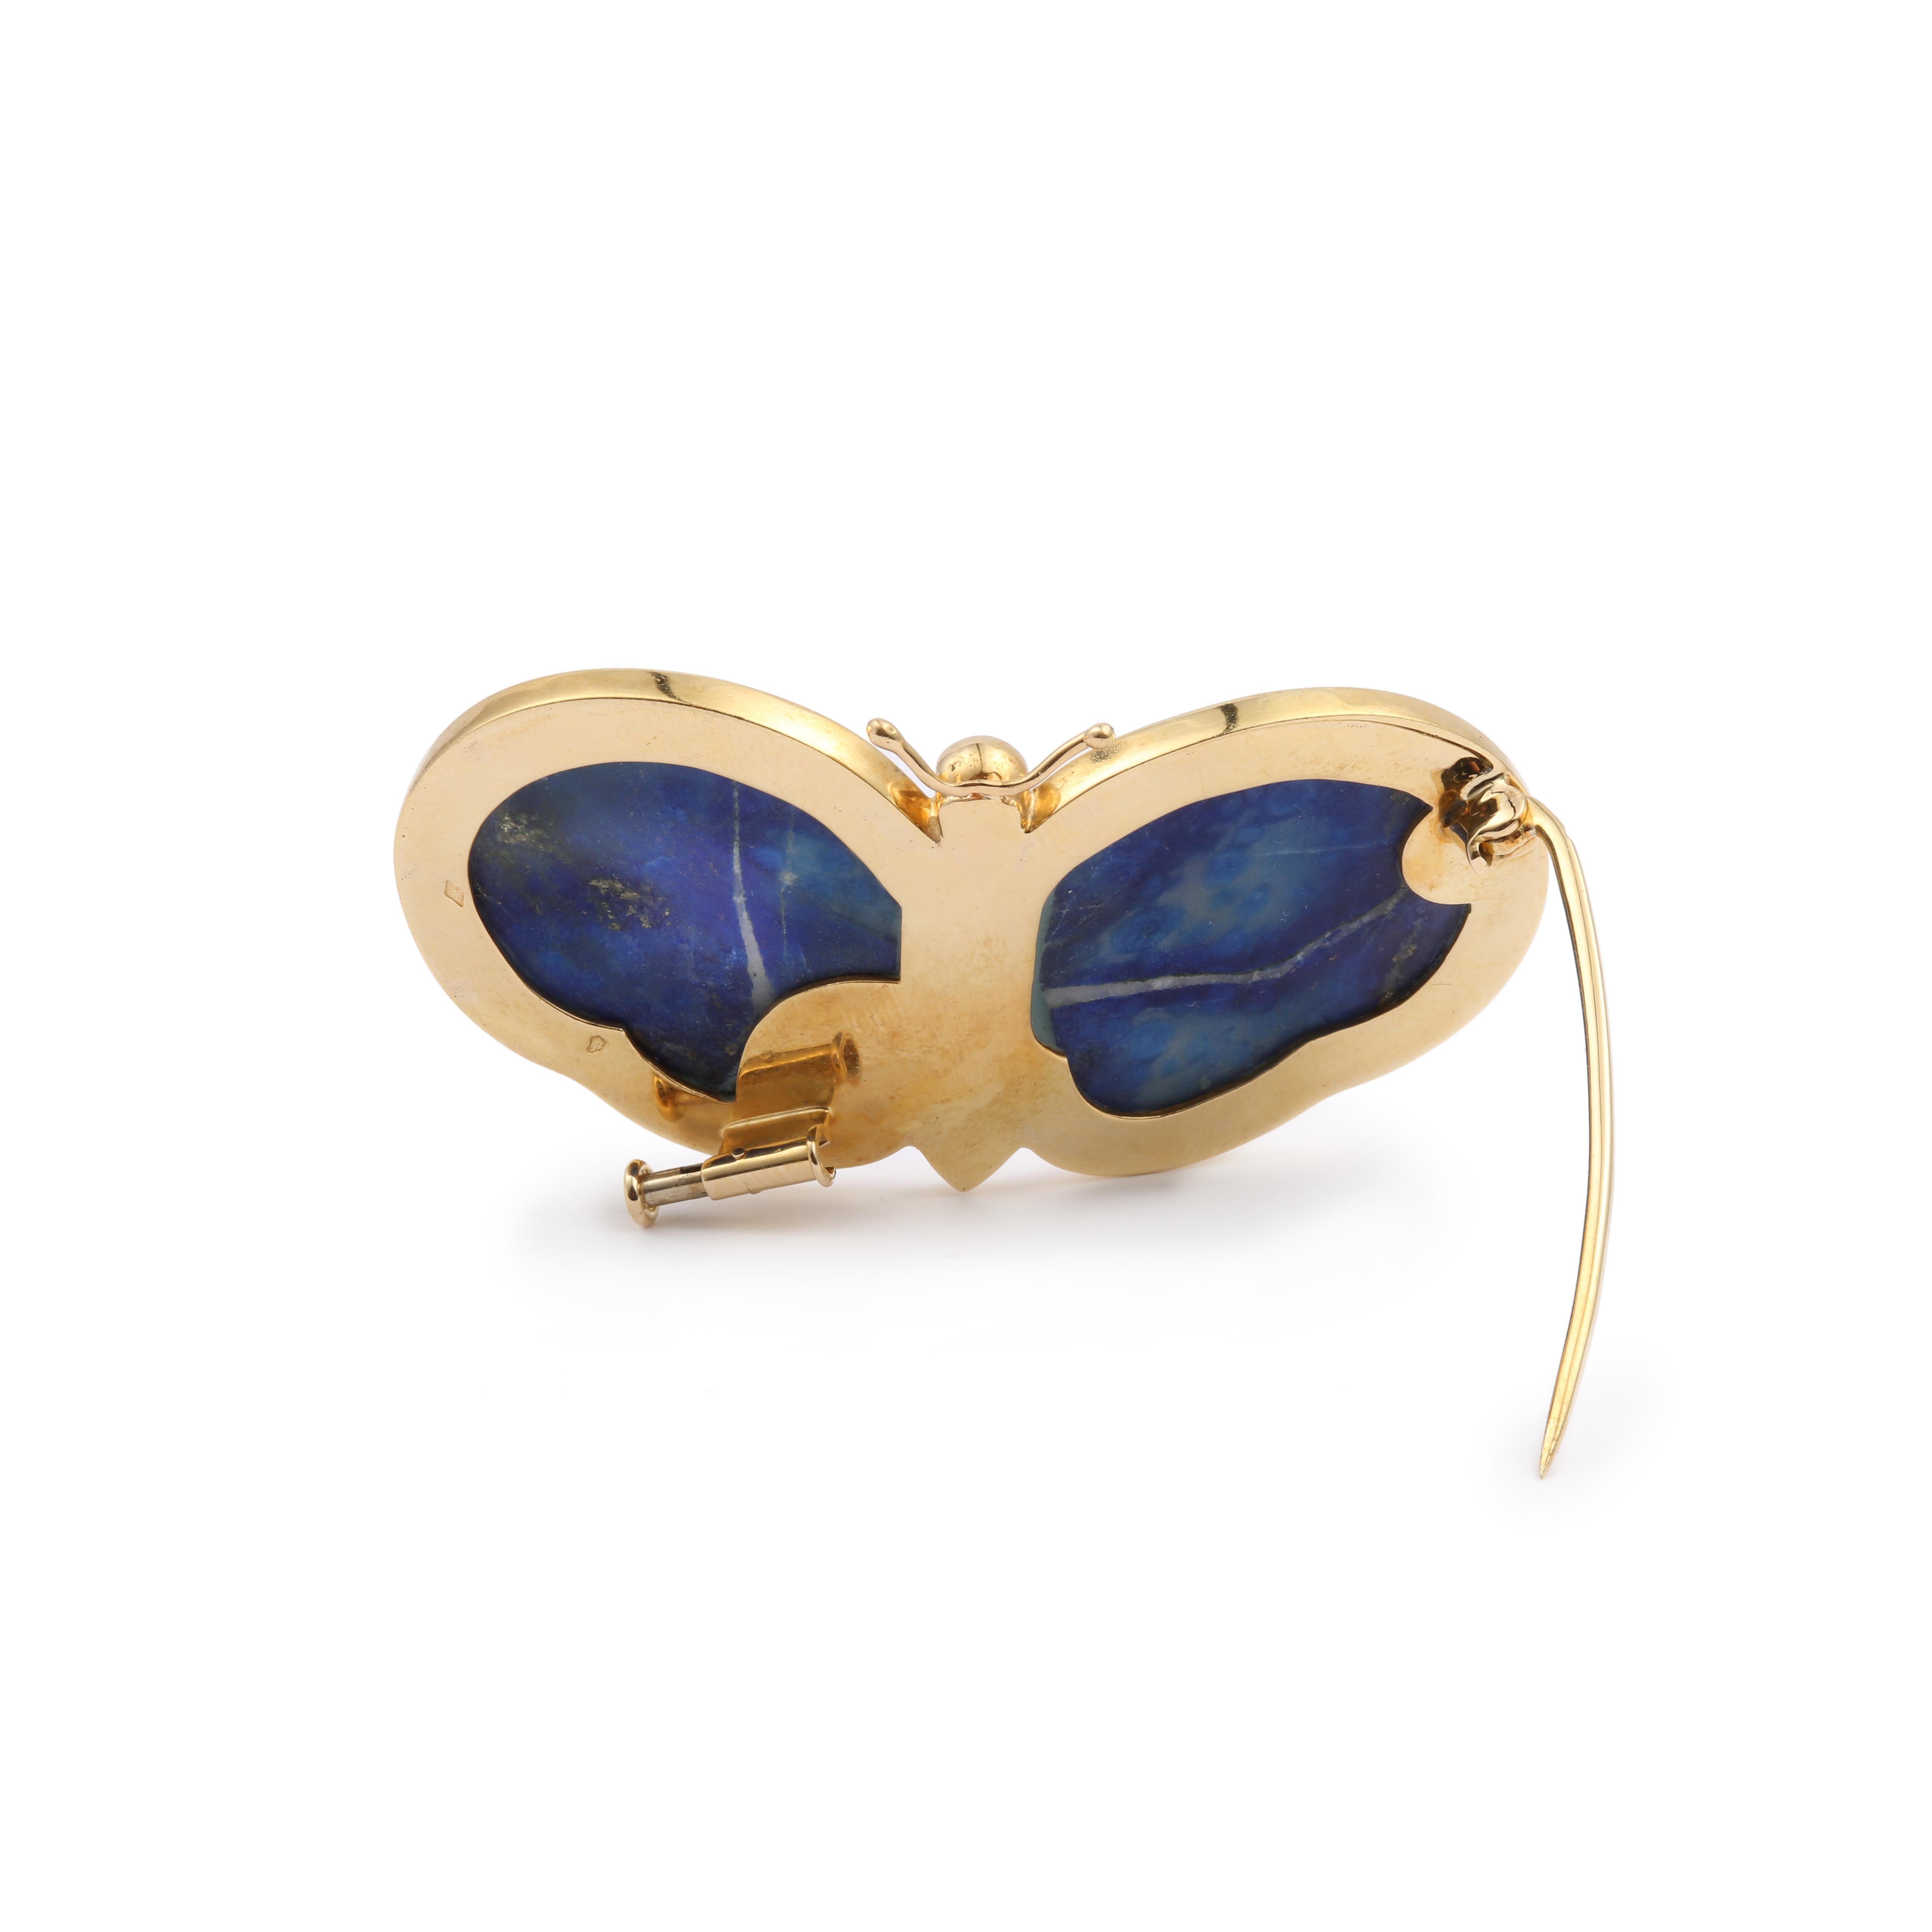 Yellow gold butterfly brooch with jasper body and lapis lazuli wings.

Dimensions : 54 x 28.49 x 8.70 mm (2.126 x 1.121 x 0.342 inch)

Weight of the brooch: 15 g

Piston clasp.

French work circa 1970

18 carat yellow gold, 750/1000th (eagle head